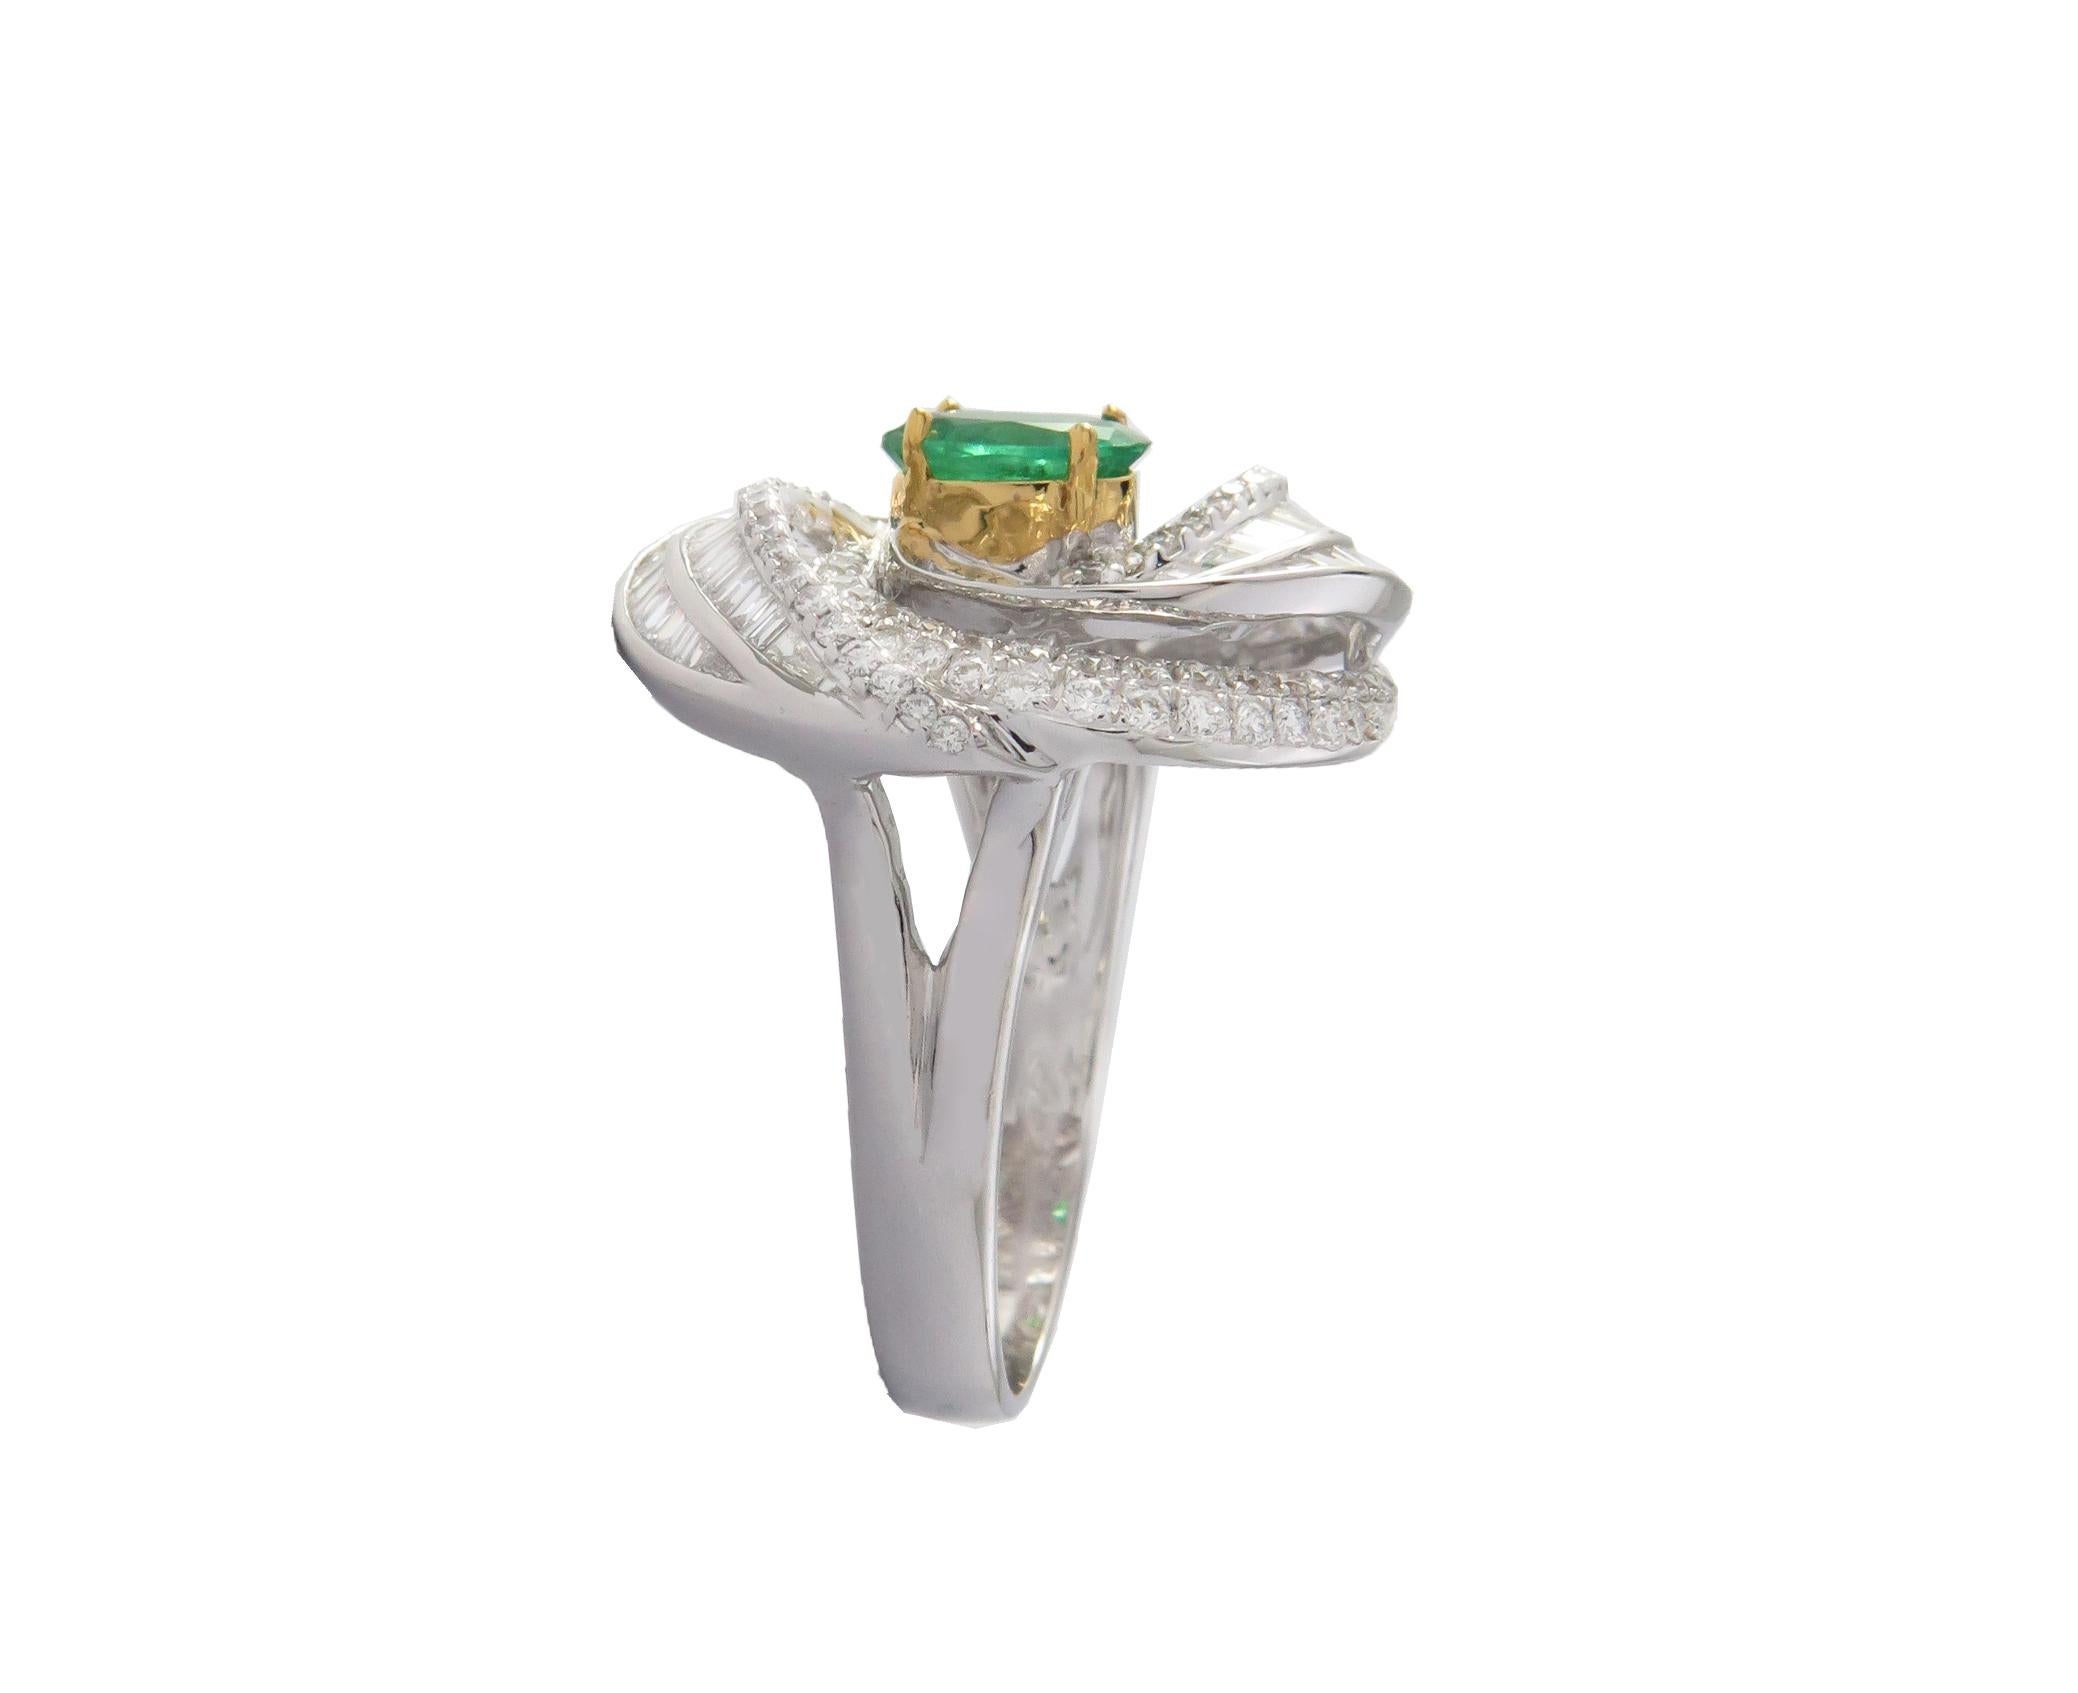 This 18K White Gold cocktail ring features a Baguette and Brilliant cut White Diamond with Beautiful Emerald Color Stone. Combine with glamorous outfits for a show-stopping effect. Each diamond hand-selected by our experts for its superior luster